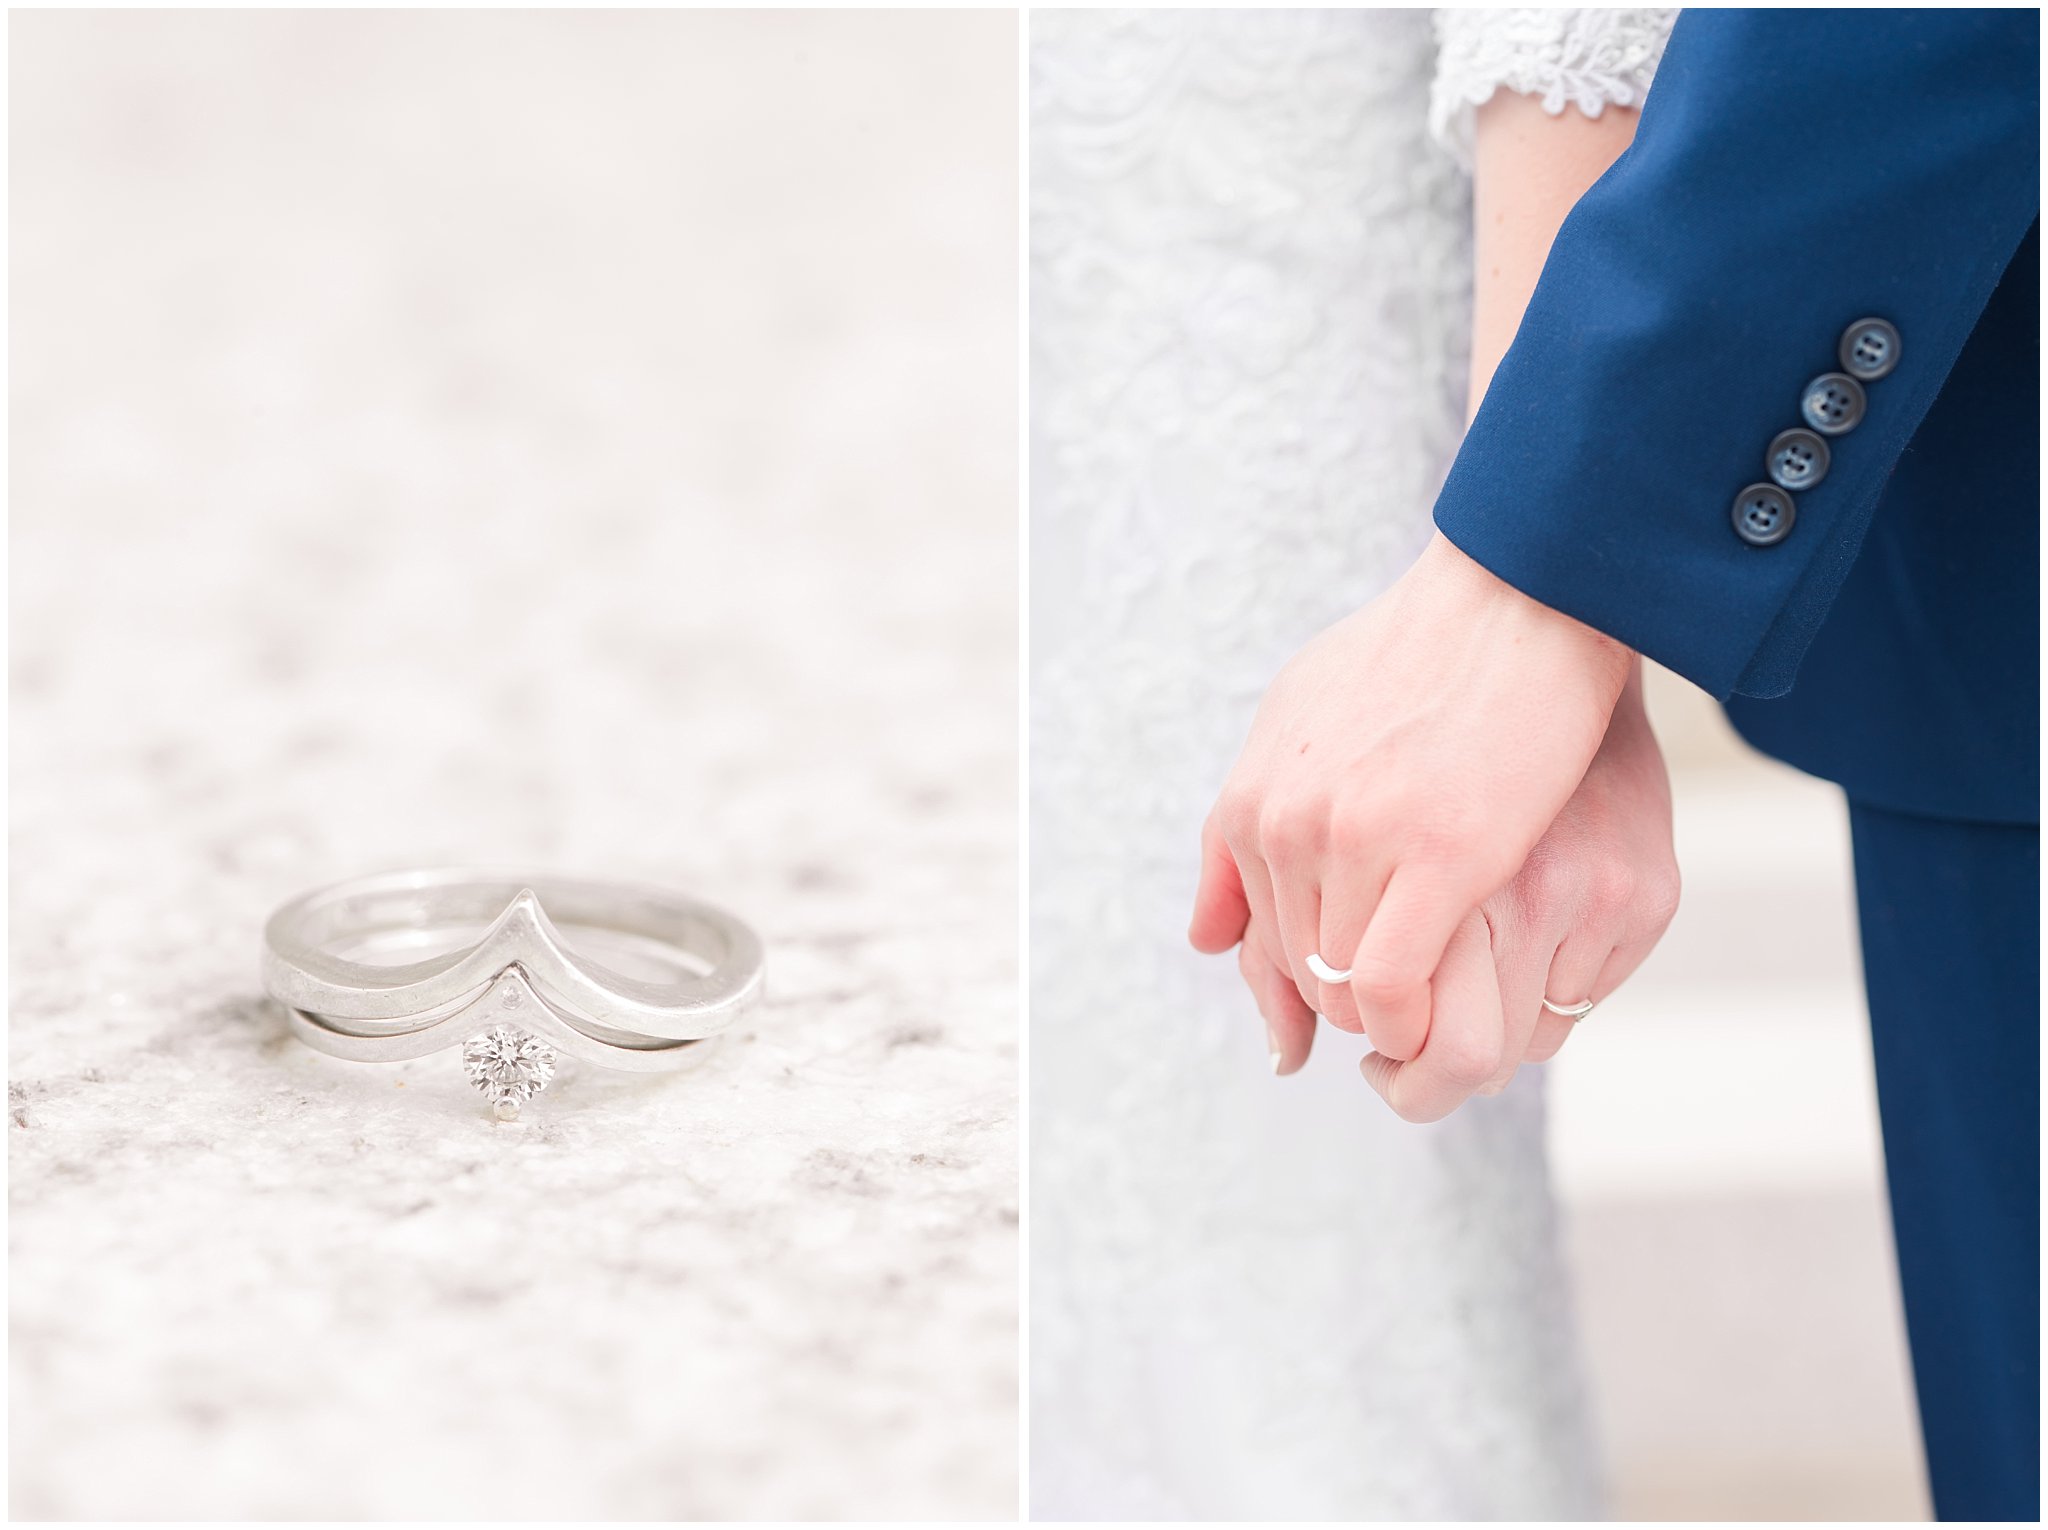 Polish wedding rings during winter wedding | Bountiful Temple Wedding and Joseph Smith Memorial Reception | Jessie and Dallin Photography